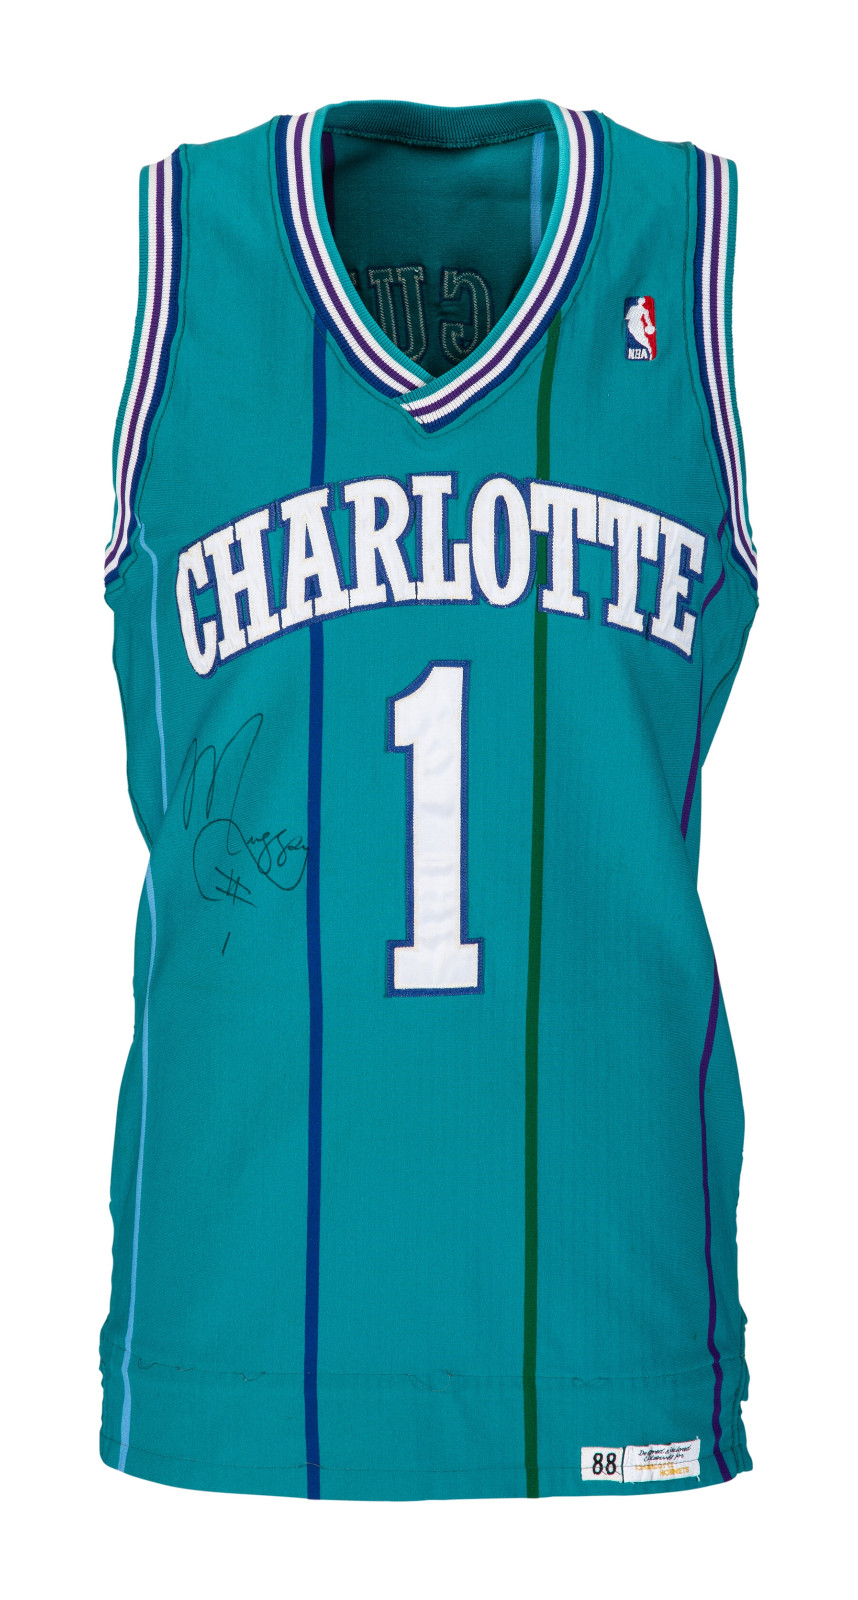 Charlotte Hornets 1988-1997 Home Jersey | peacecommission.kdsg.gov.ng